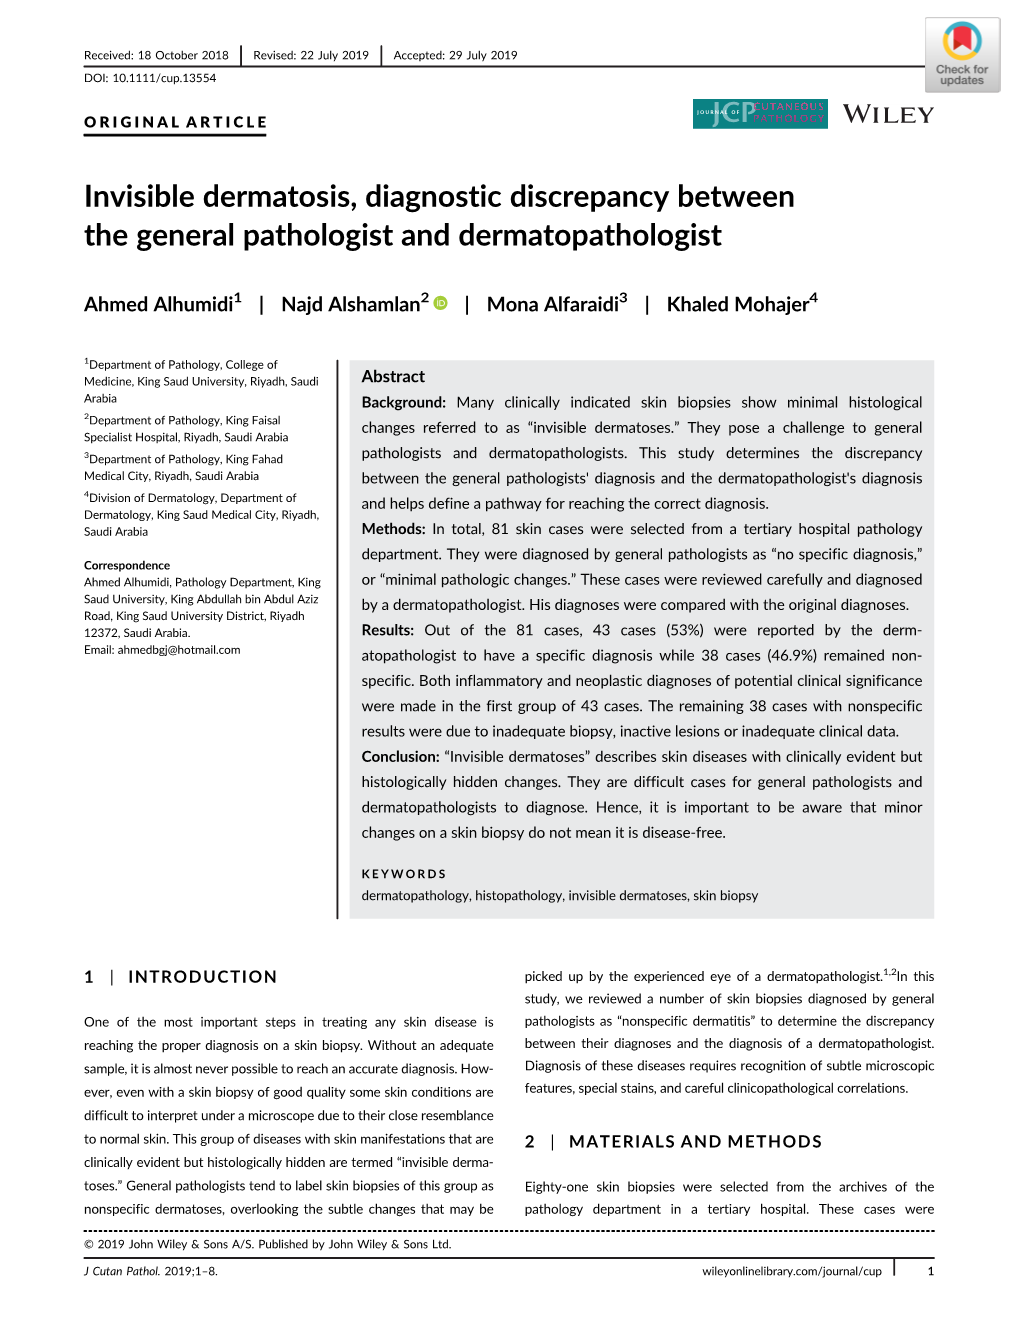 Invisible Dermatosis, Diagnostic Discrepancy Between the General Pathologist and Dermatopathologist